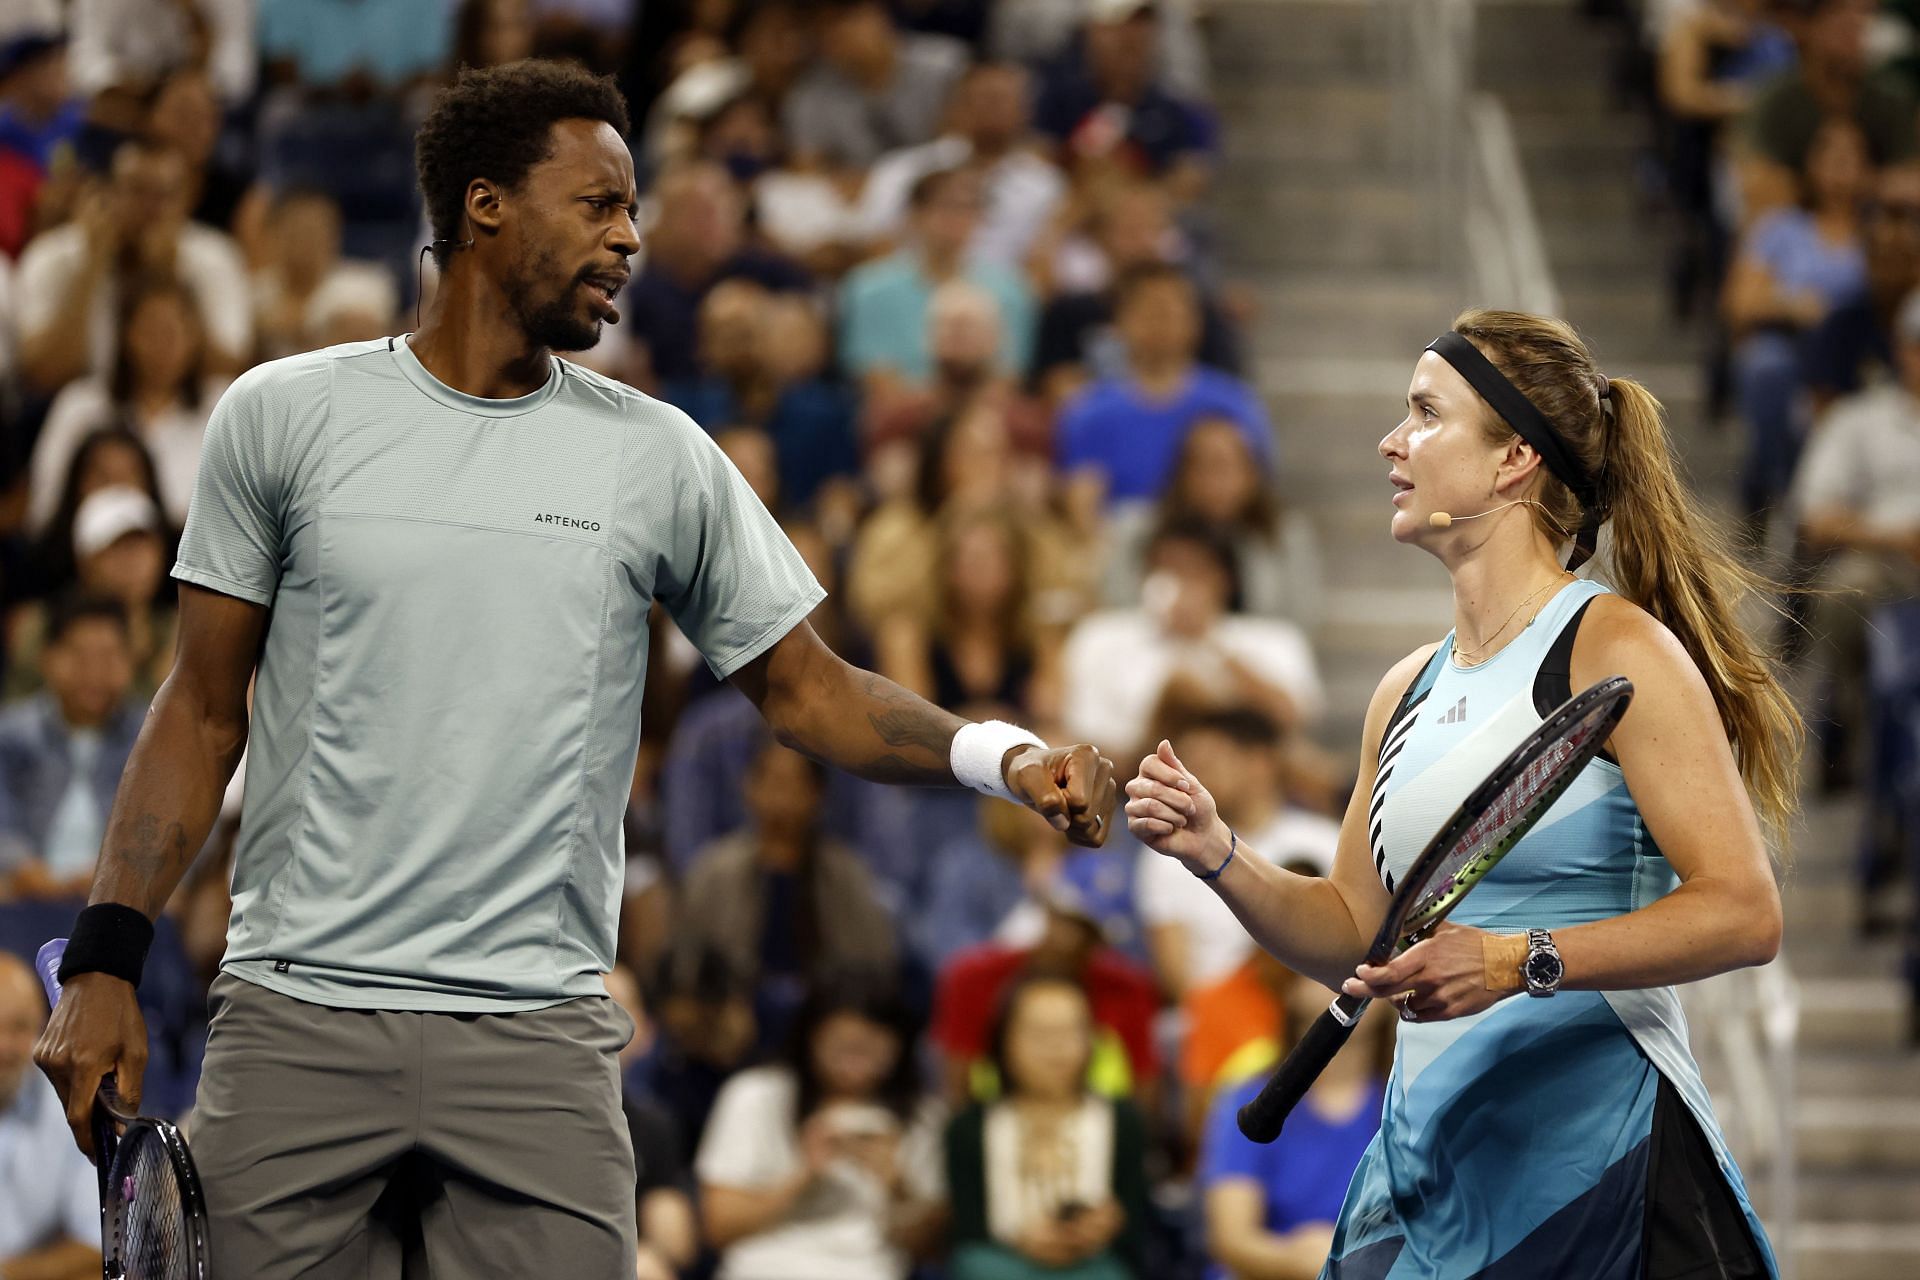 Gael Monfils and Elina Svitolina at the 2023 US Open - Stars of the Open Exhibition Match